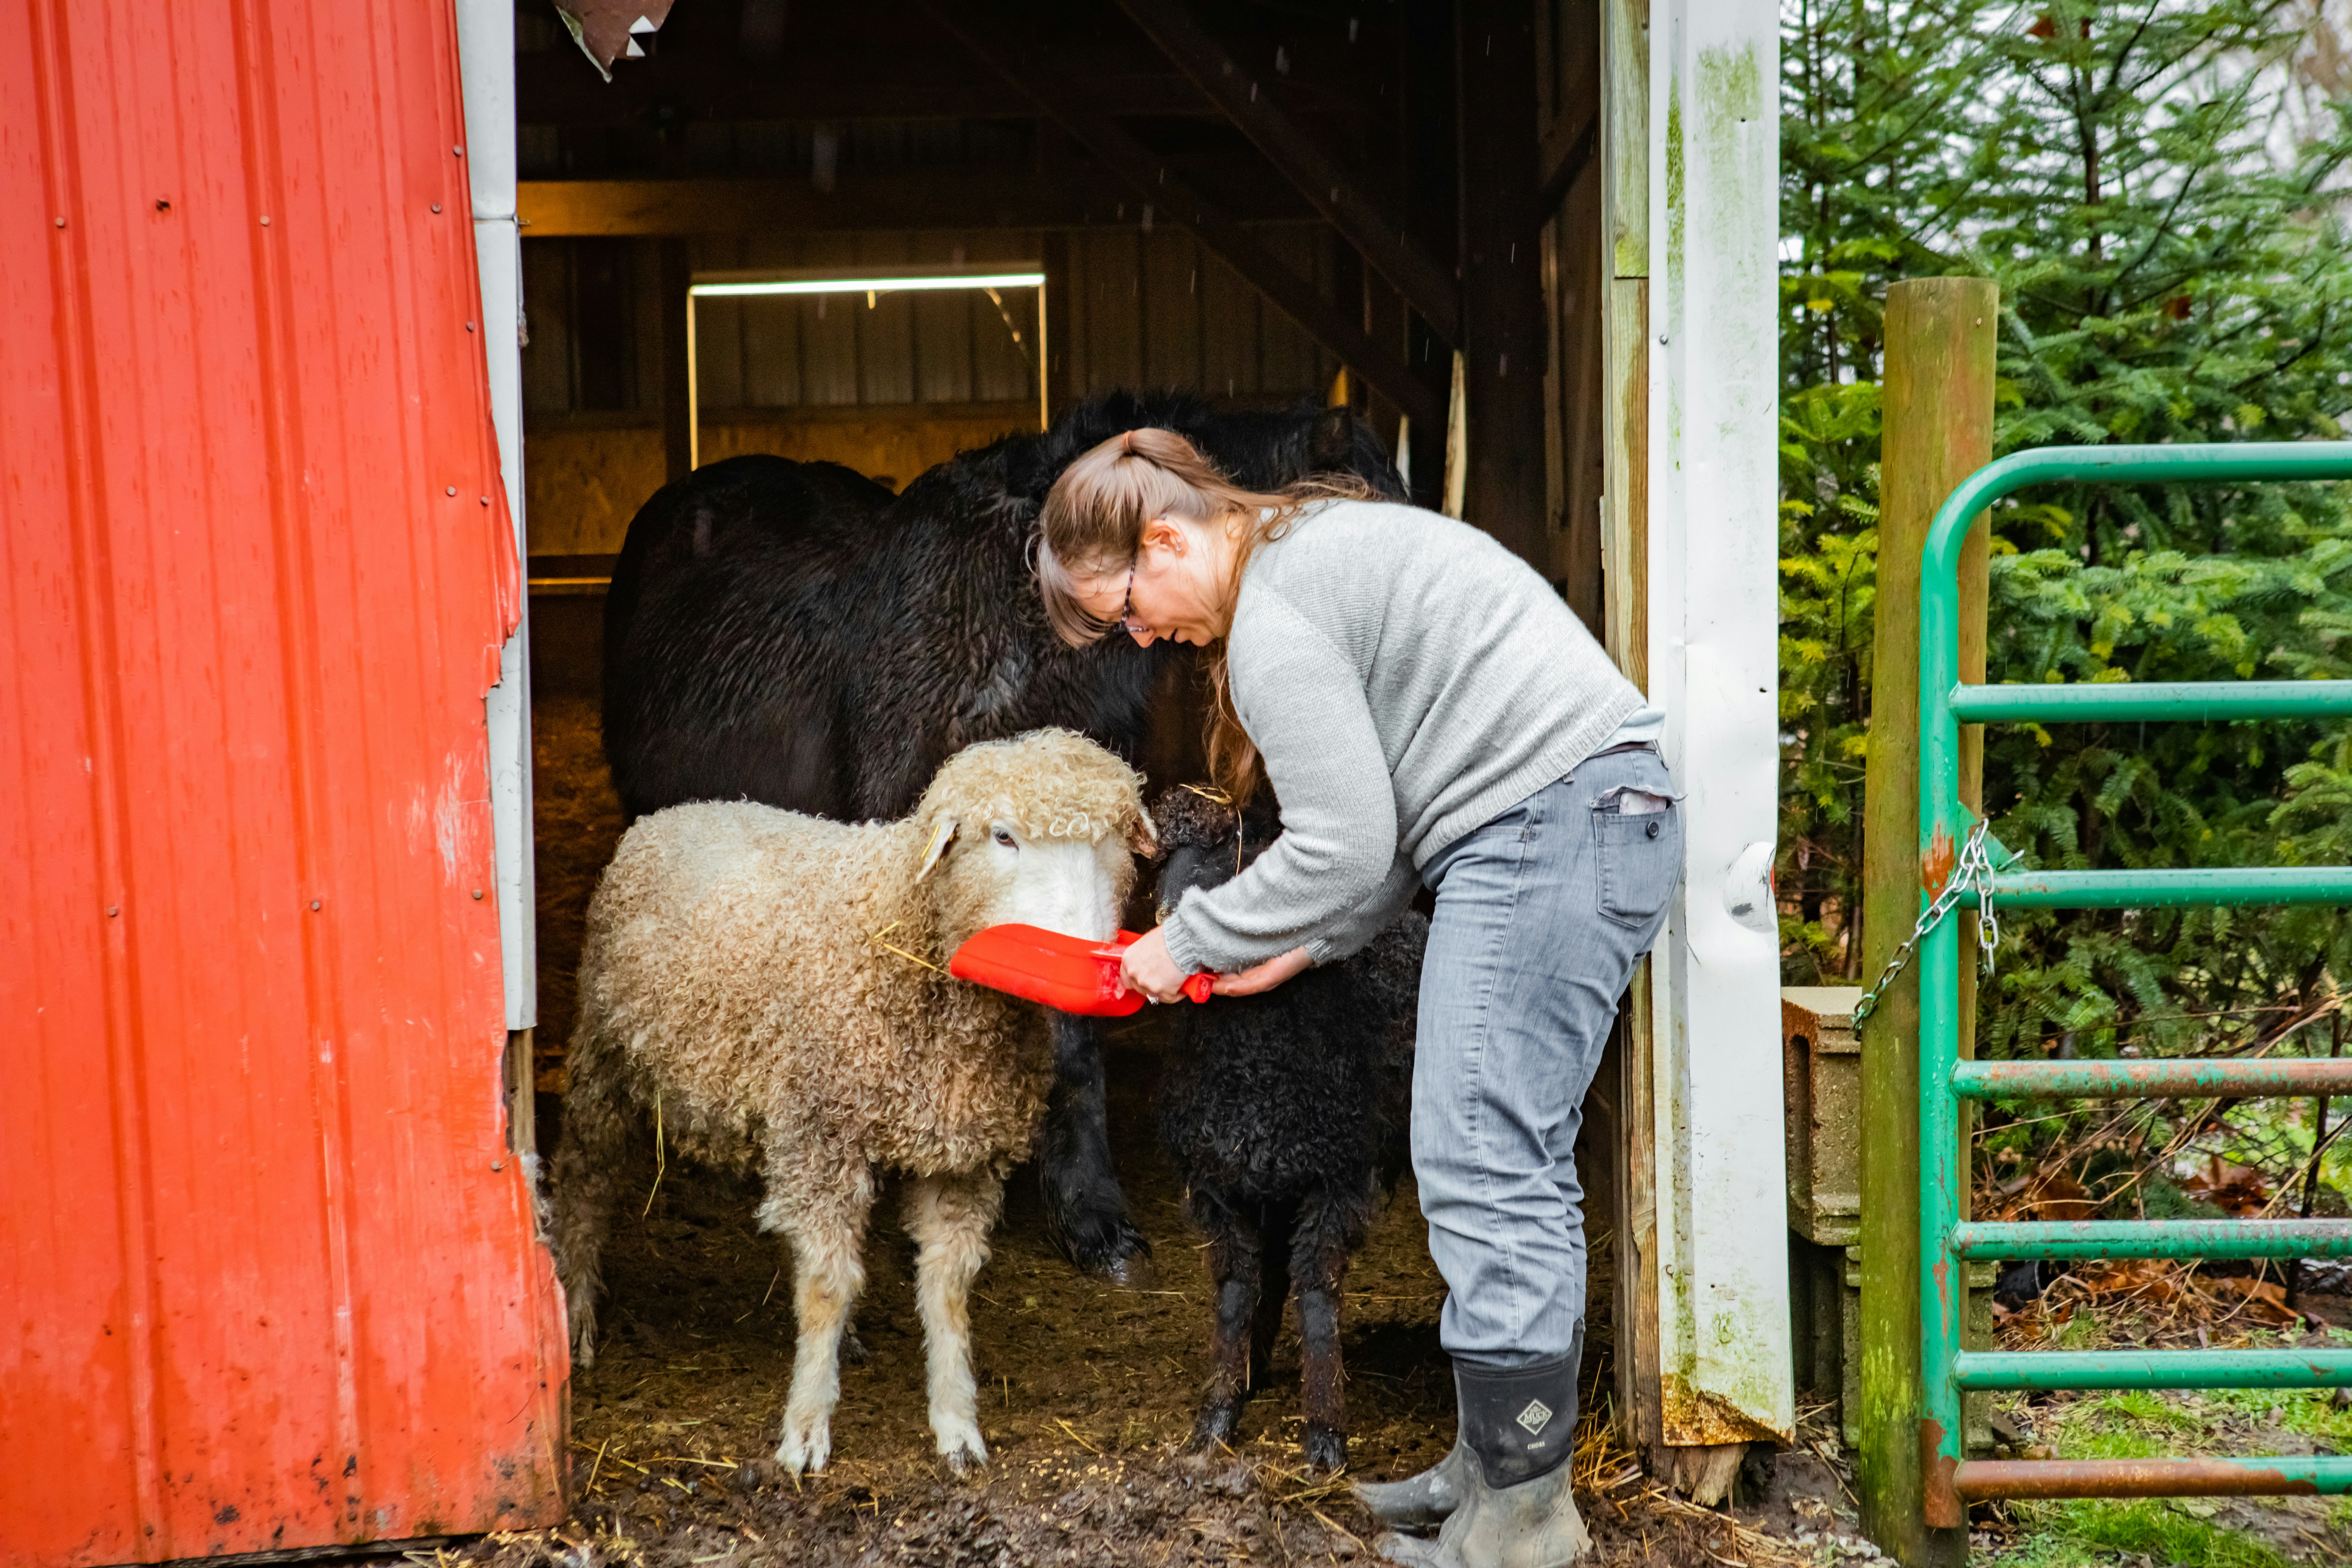 Columbus, Ohio farmer Rachel Najjar tends to a sheep named Gandalf, holding a red pan up to his mouth as they stand in the doorway of a bright red barn. Rachel wears worn jeans and a grey sweater and has long light brown hair pulled back in a high, loose ponytail. Behind her are more farm animals with black coats.